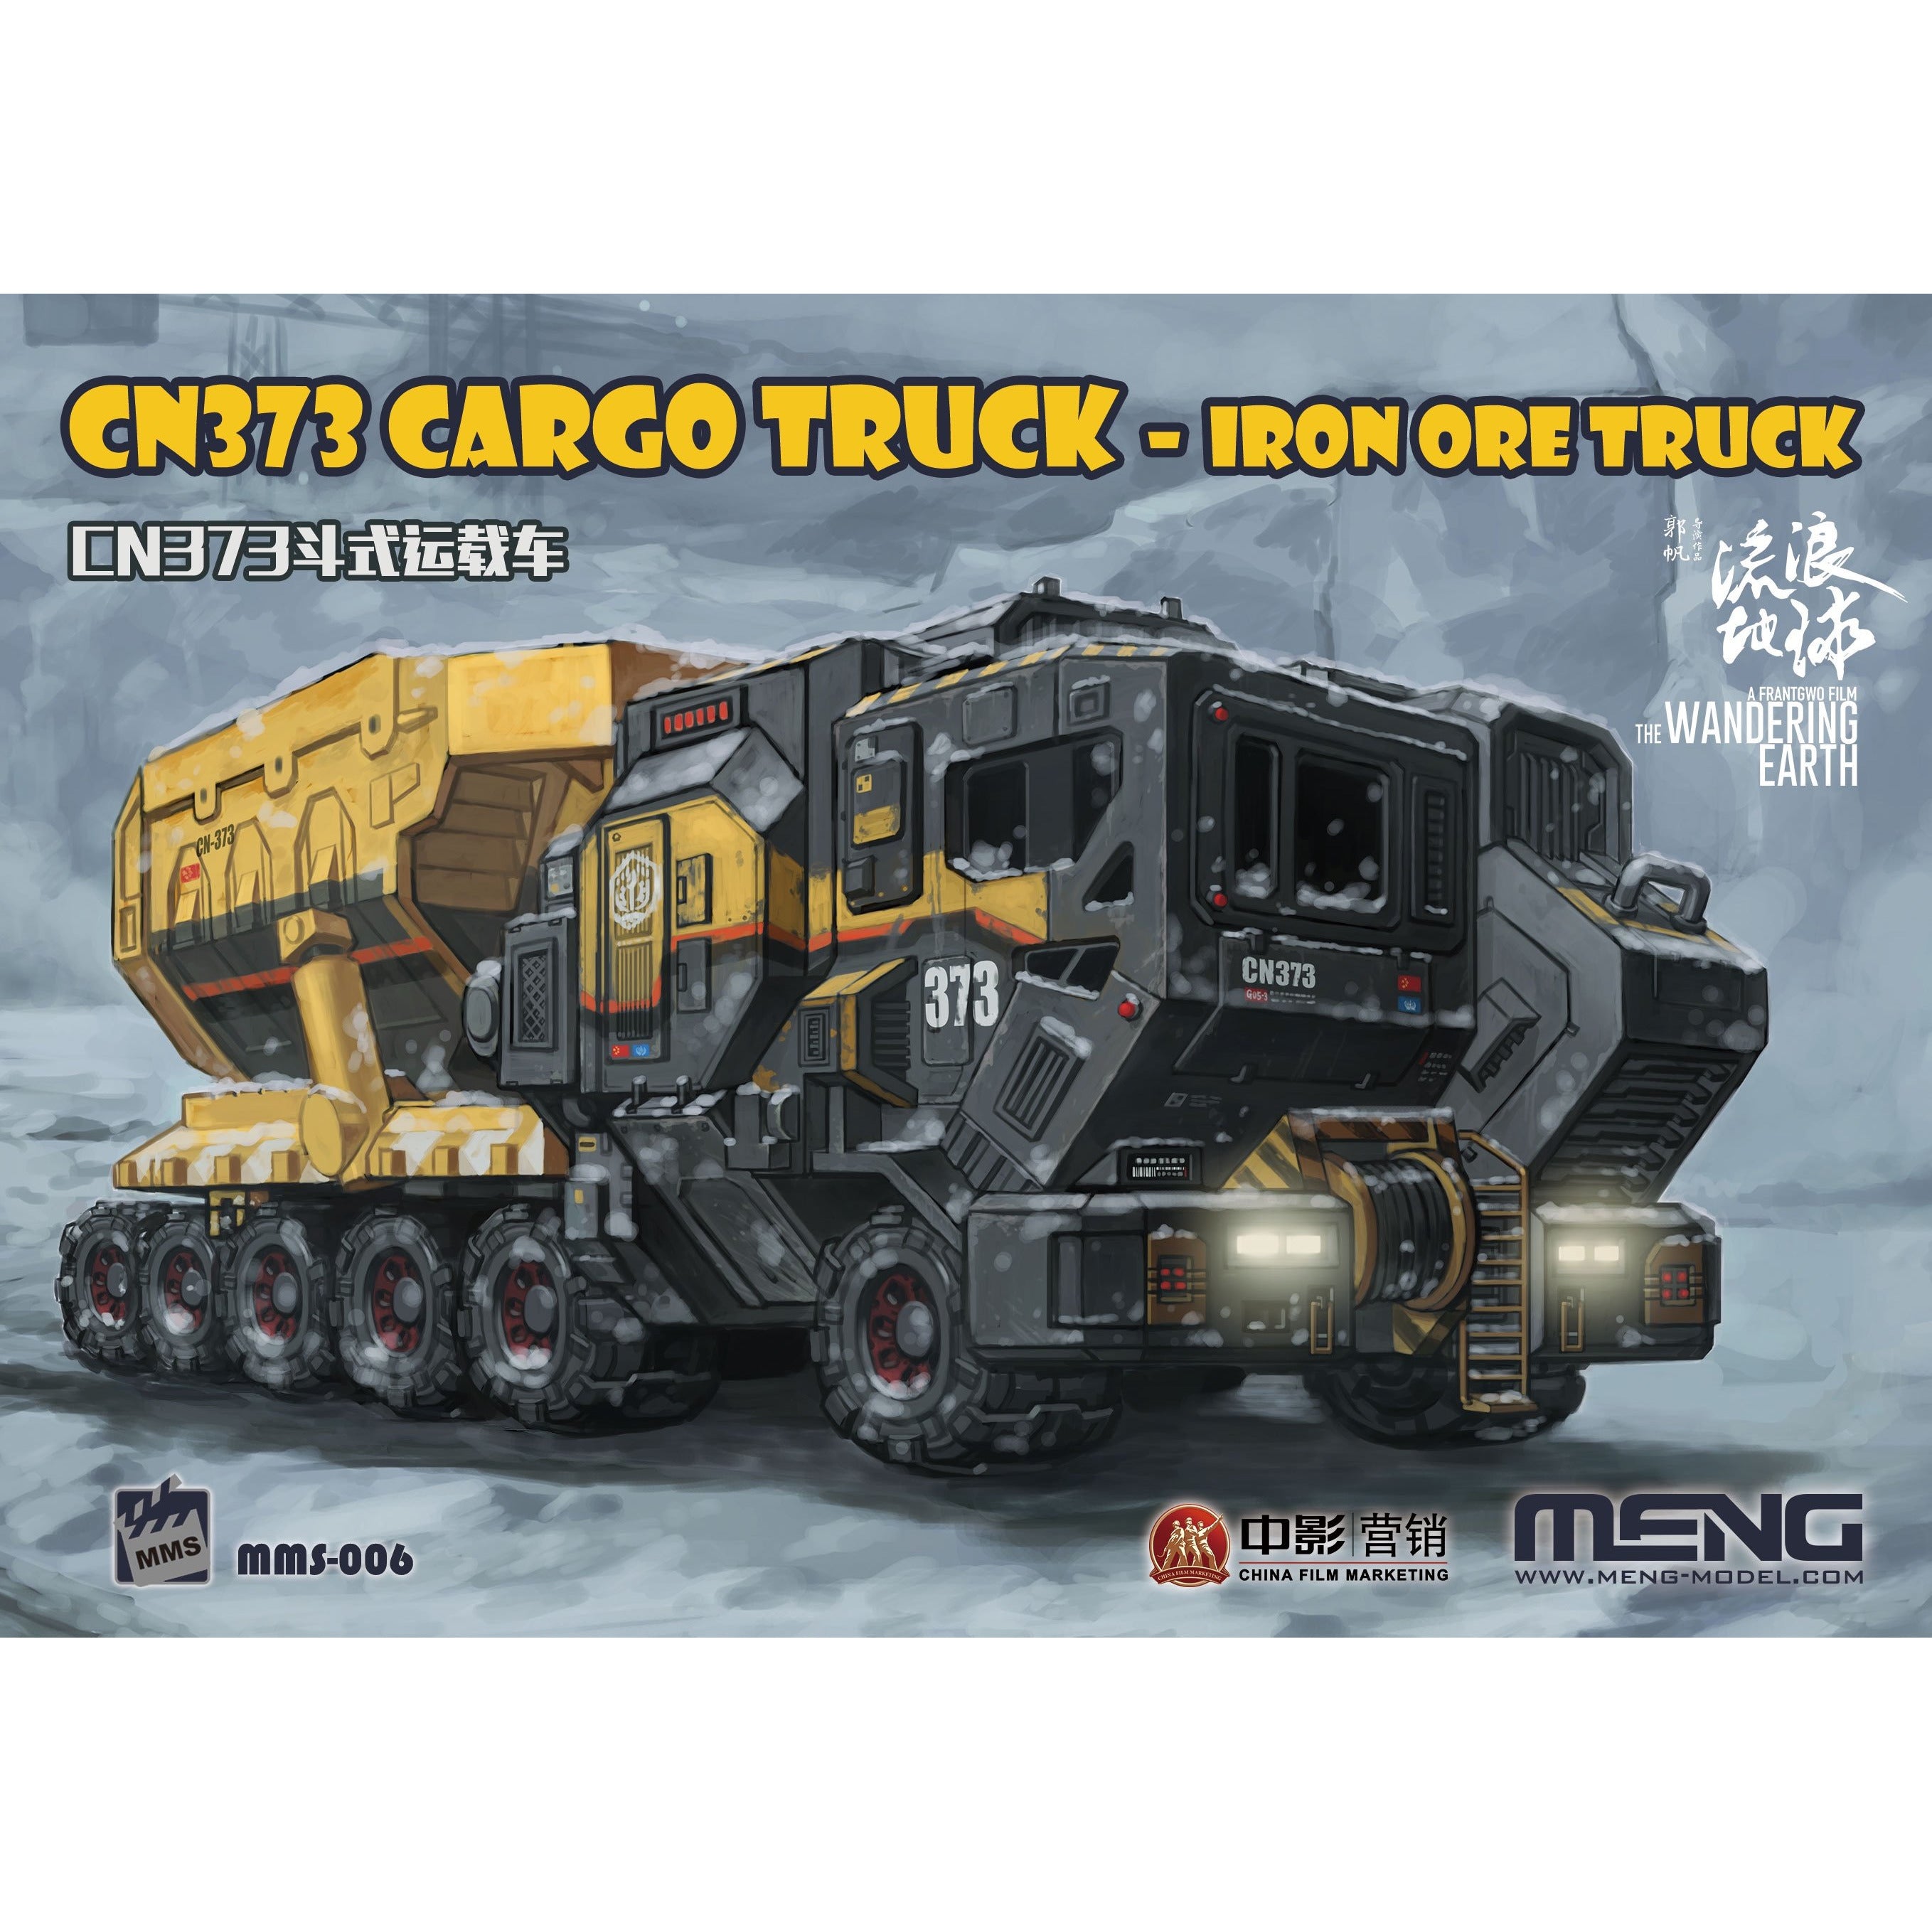 CN373 Cargo Truck 1/200 Iron Ore Truck Science Fiction Model Kit #MMS-006 by Meng